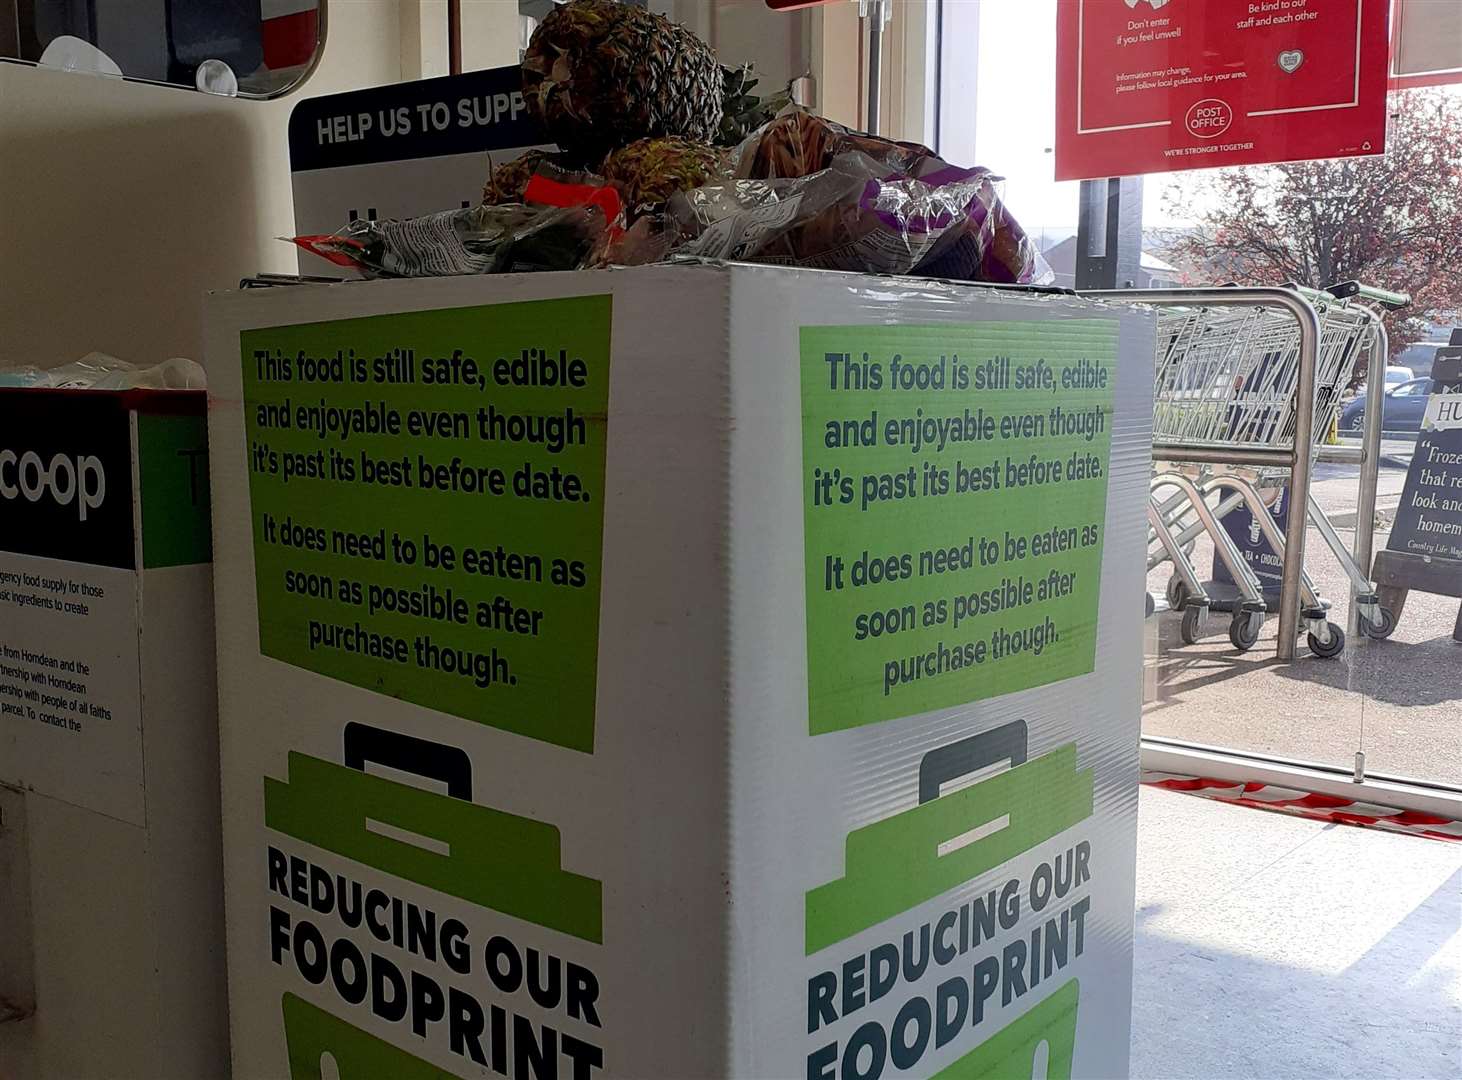 The initiative is part of the Co-op's Reducing our Foodprint scheme